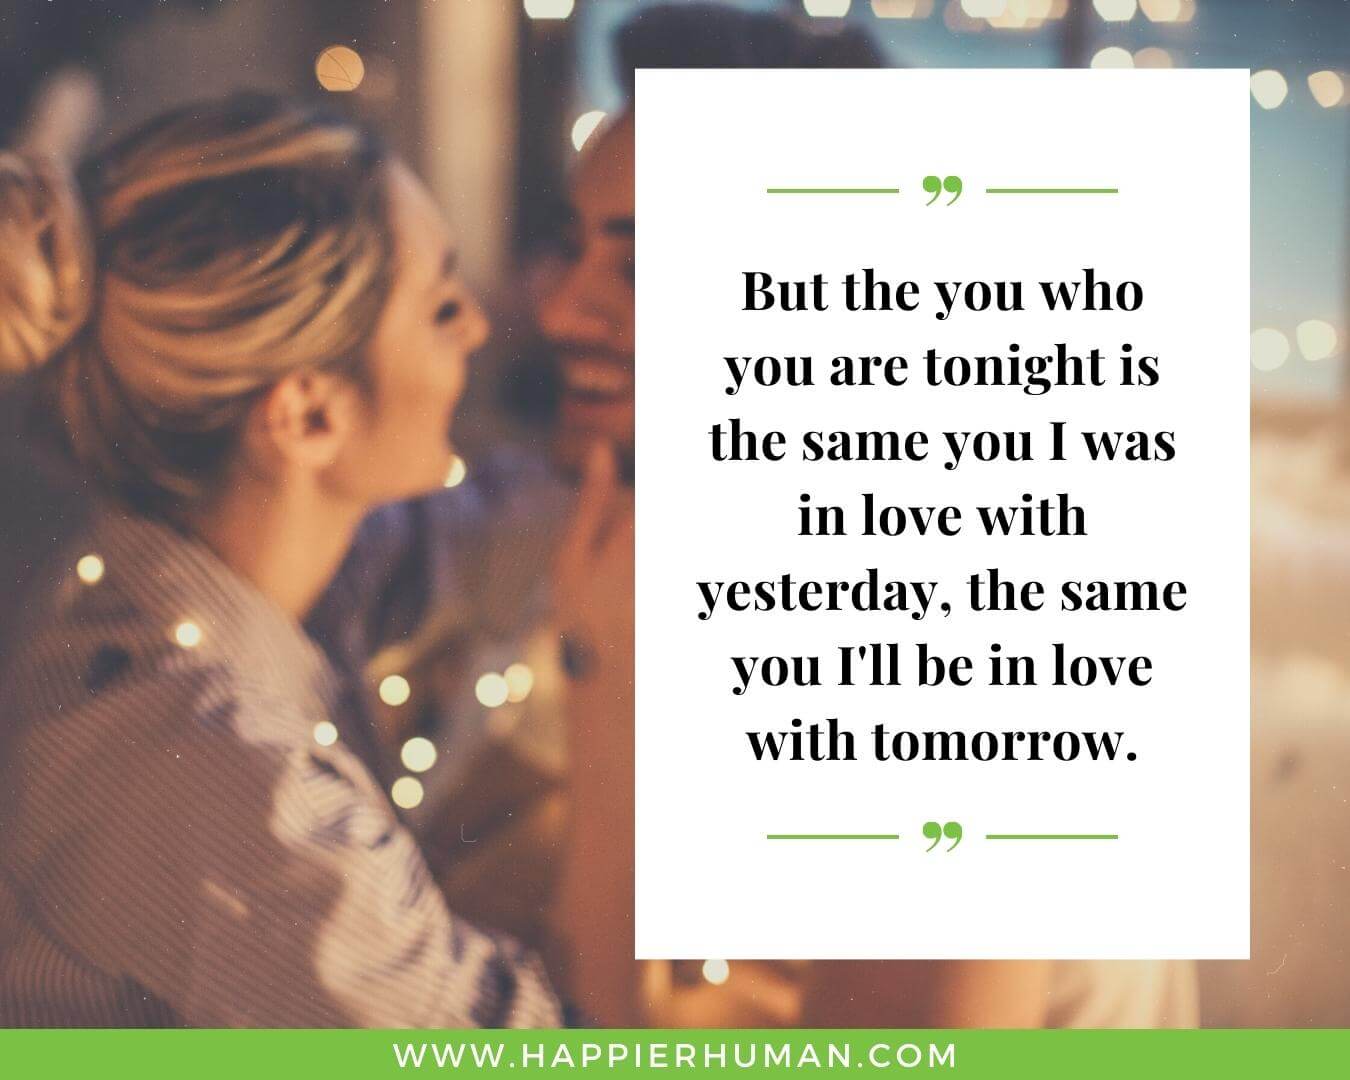 Quotes about love and relationships - “But the you who you are tonight is the same you I was in love with yesterday, the same you I'll be in love with tomorrow.”